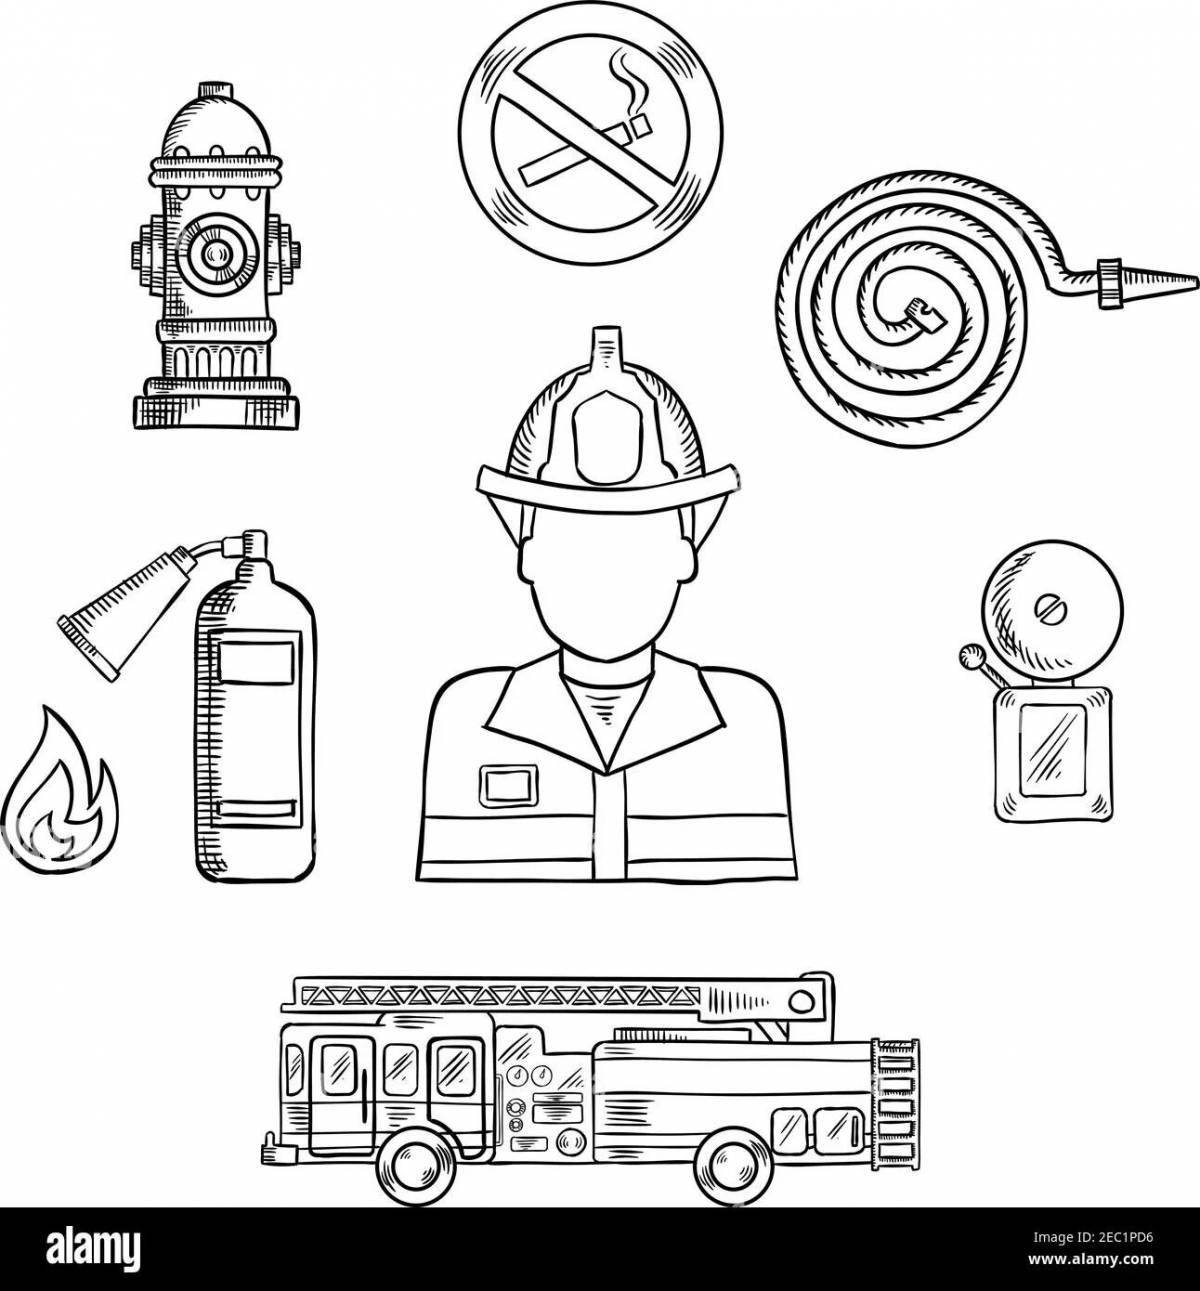 Magic fire shield coloring page for kids